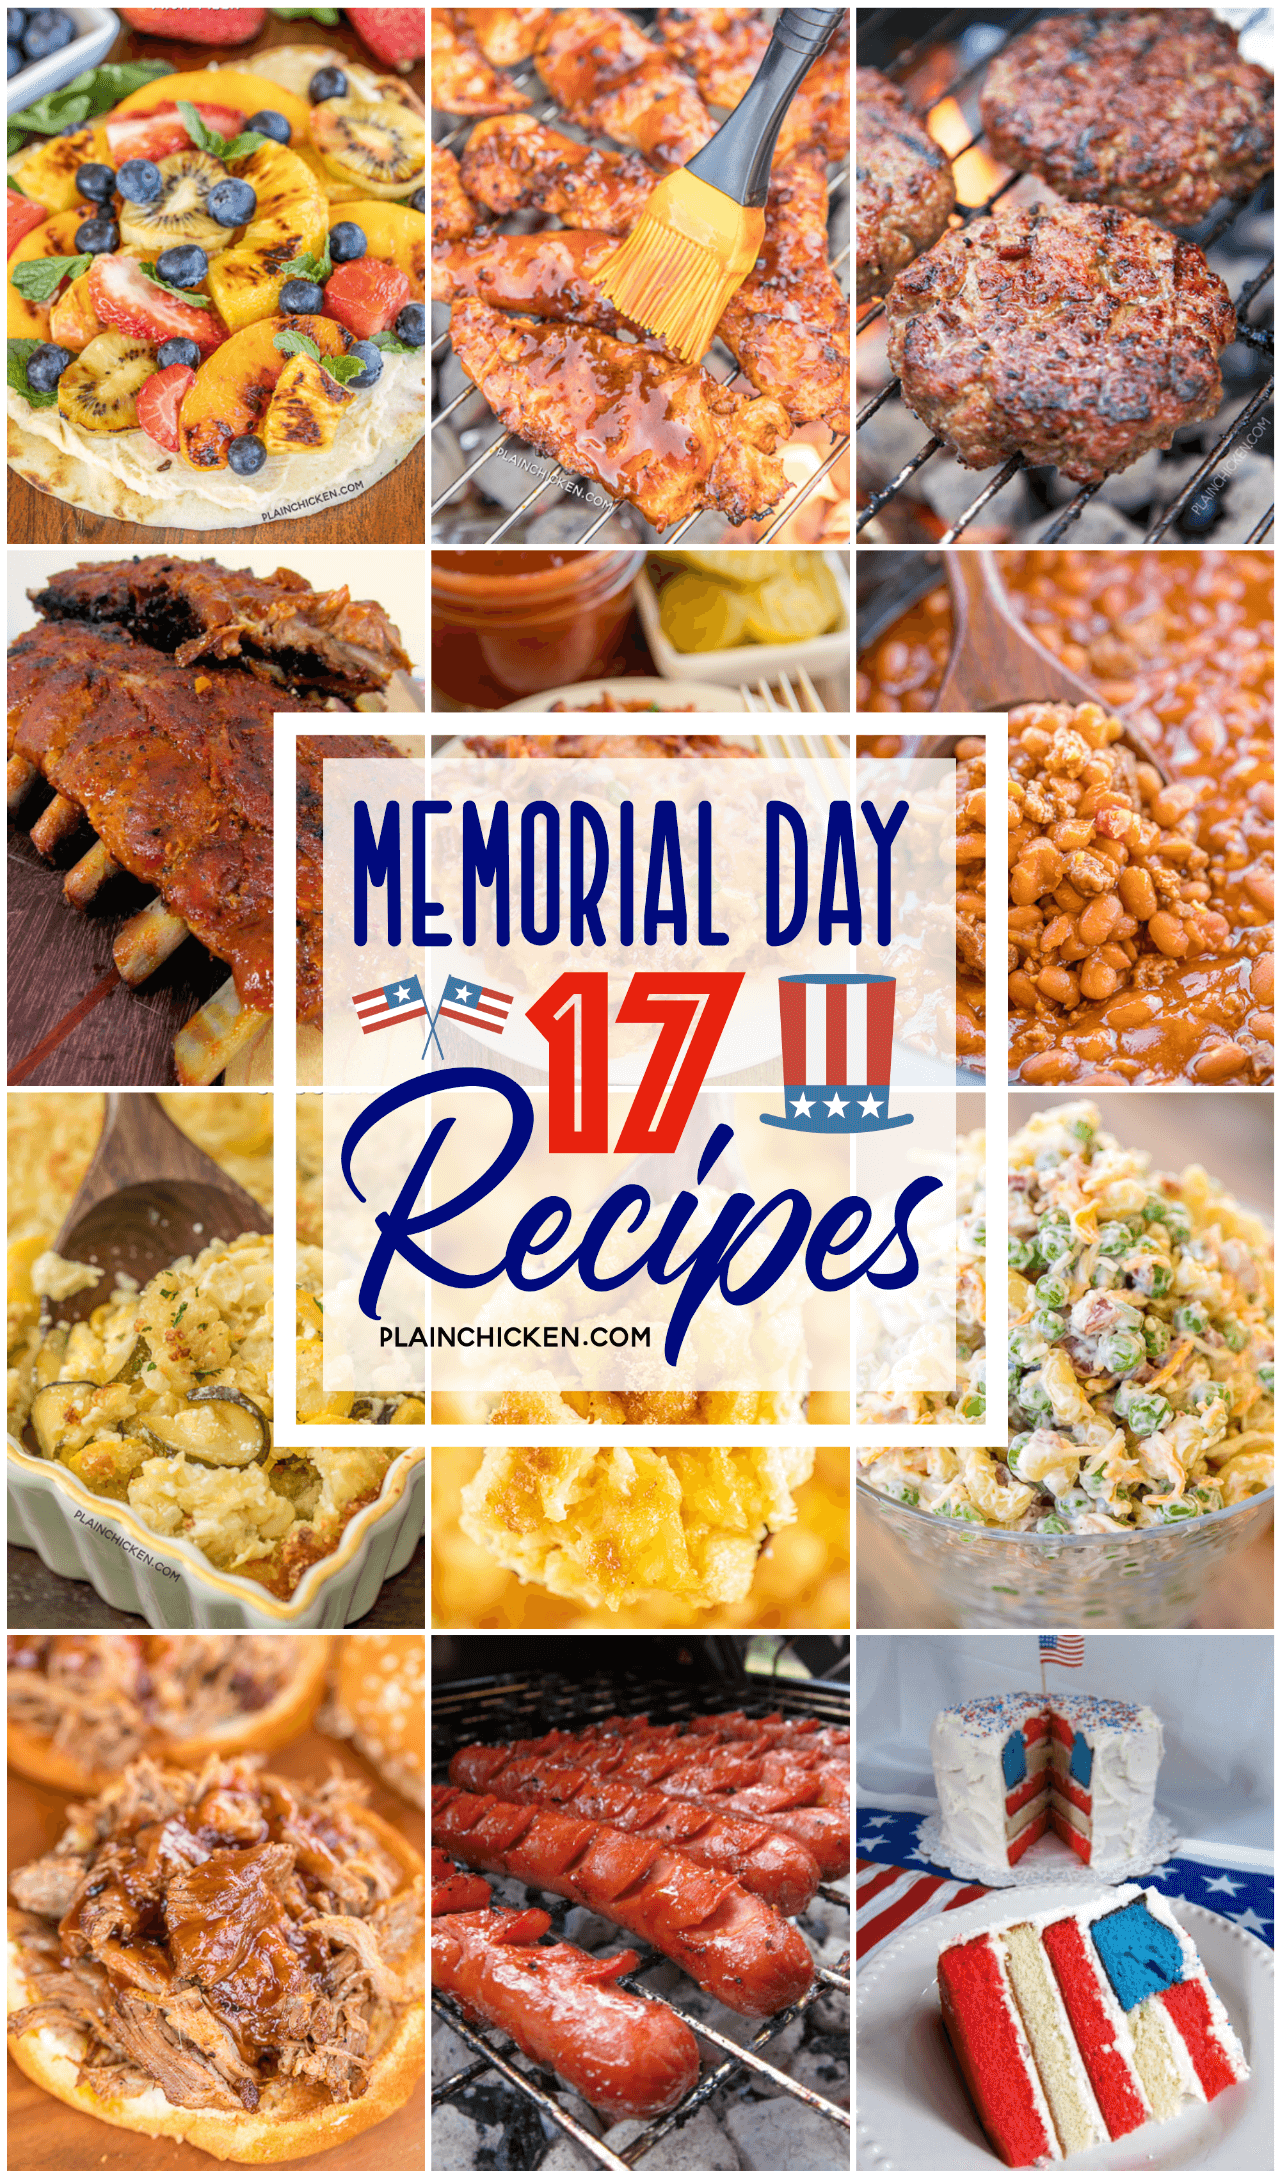 17 Memorial Day Recipe Ideas - lots of easy and delicious recipes for